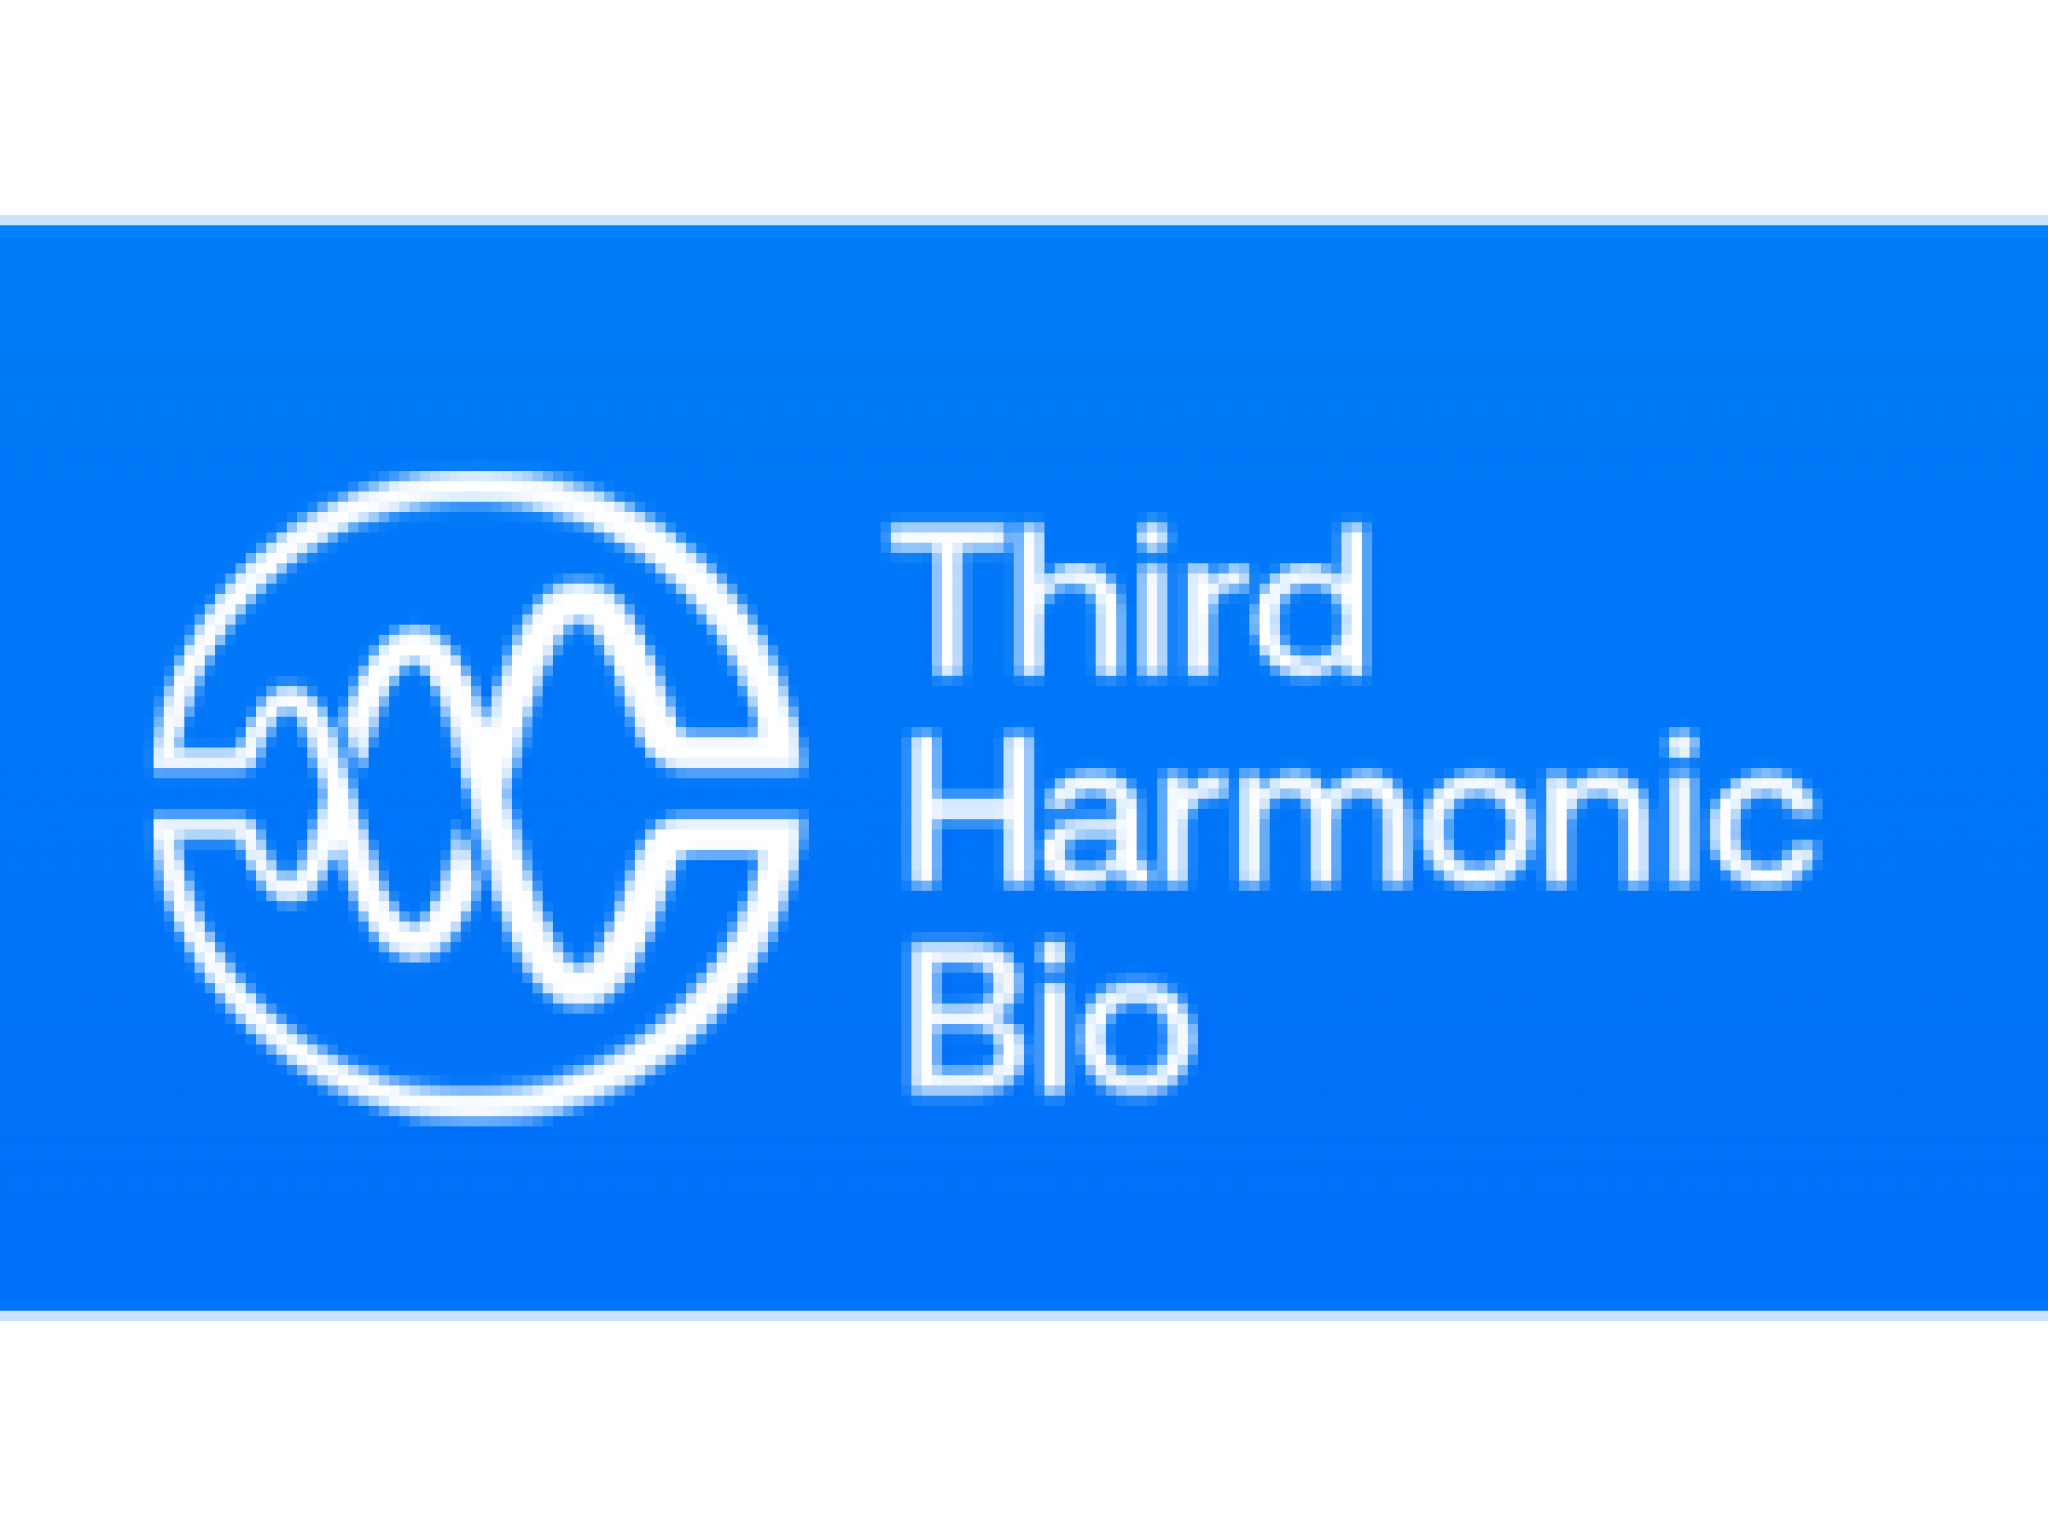  why-third-harmonic-bio-shares-are-trading-lower-by-over-78-here-are-40-stocks-moving-in-thursdays-mid-day-session 